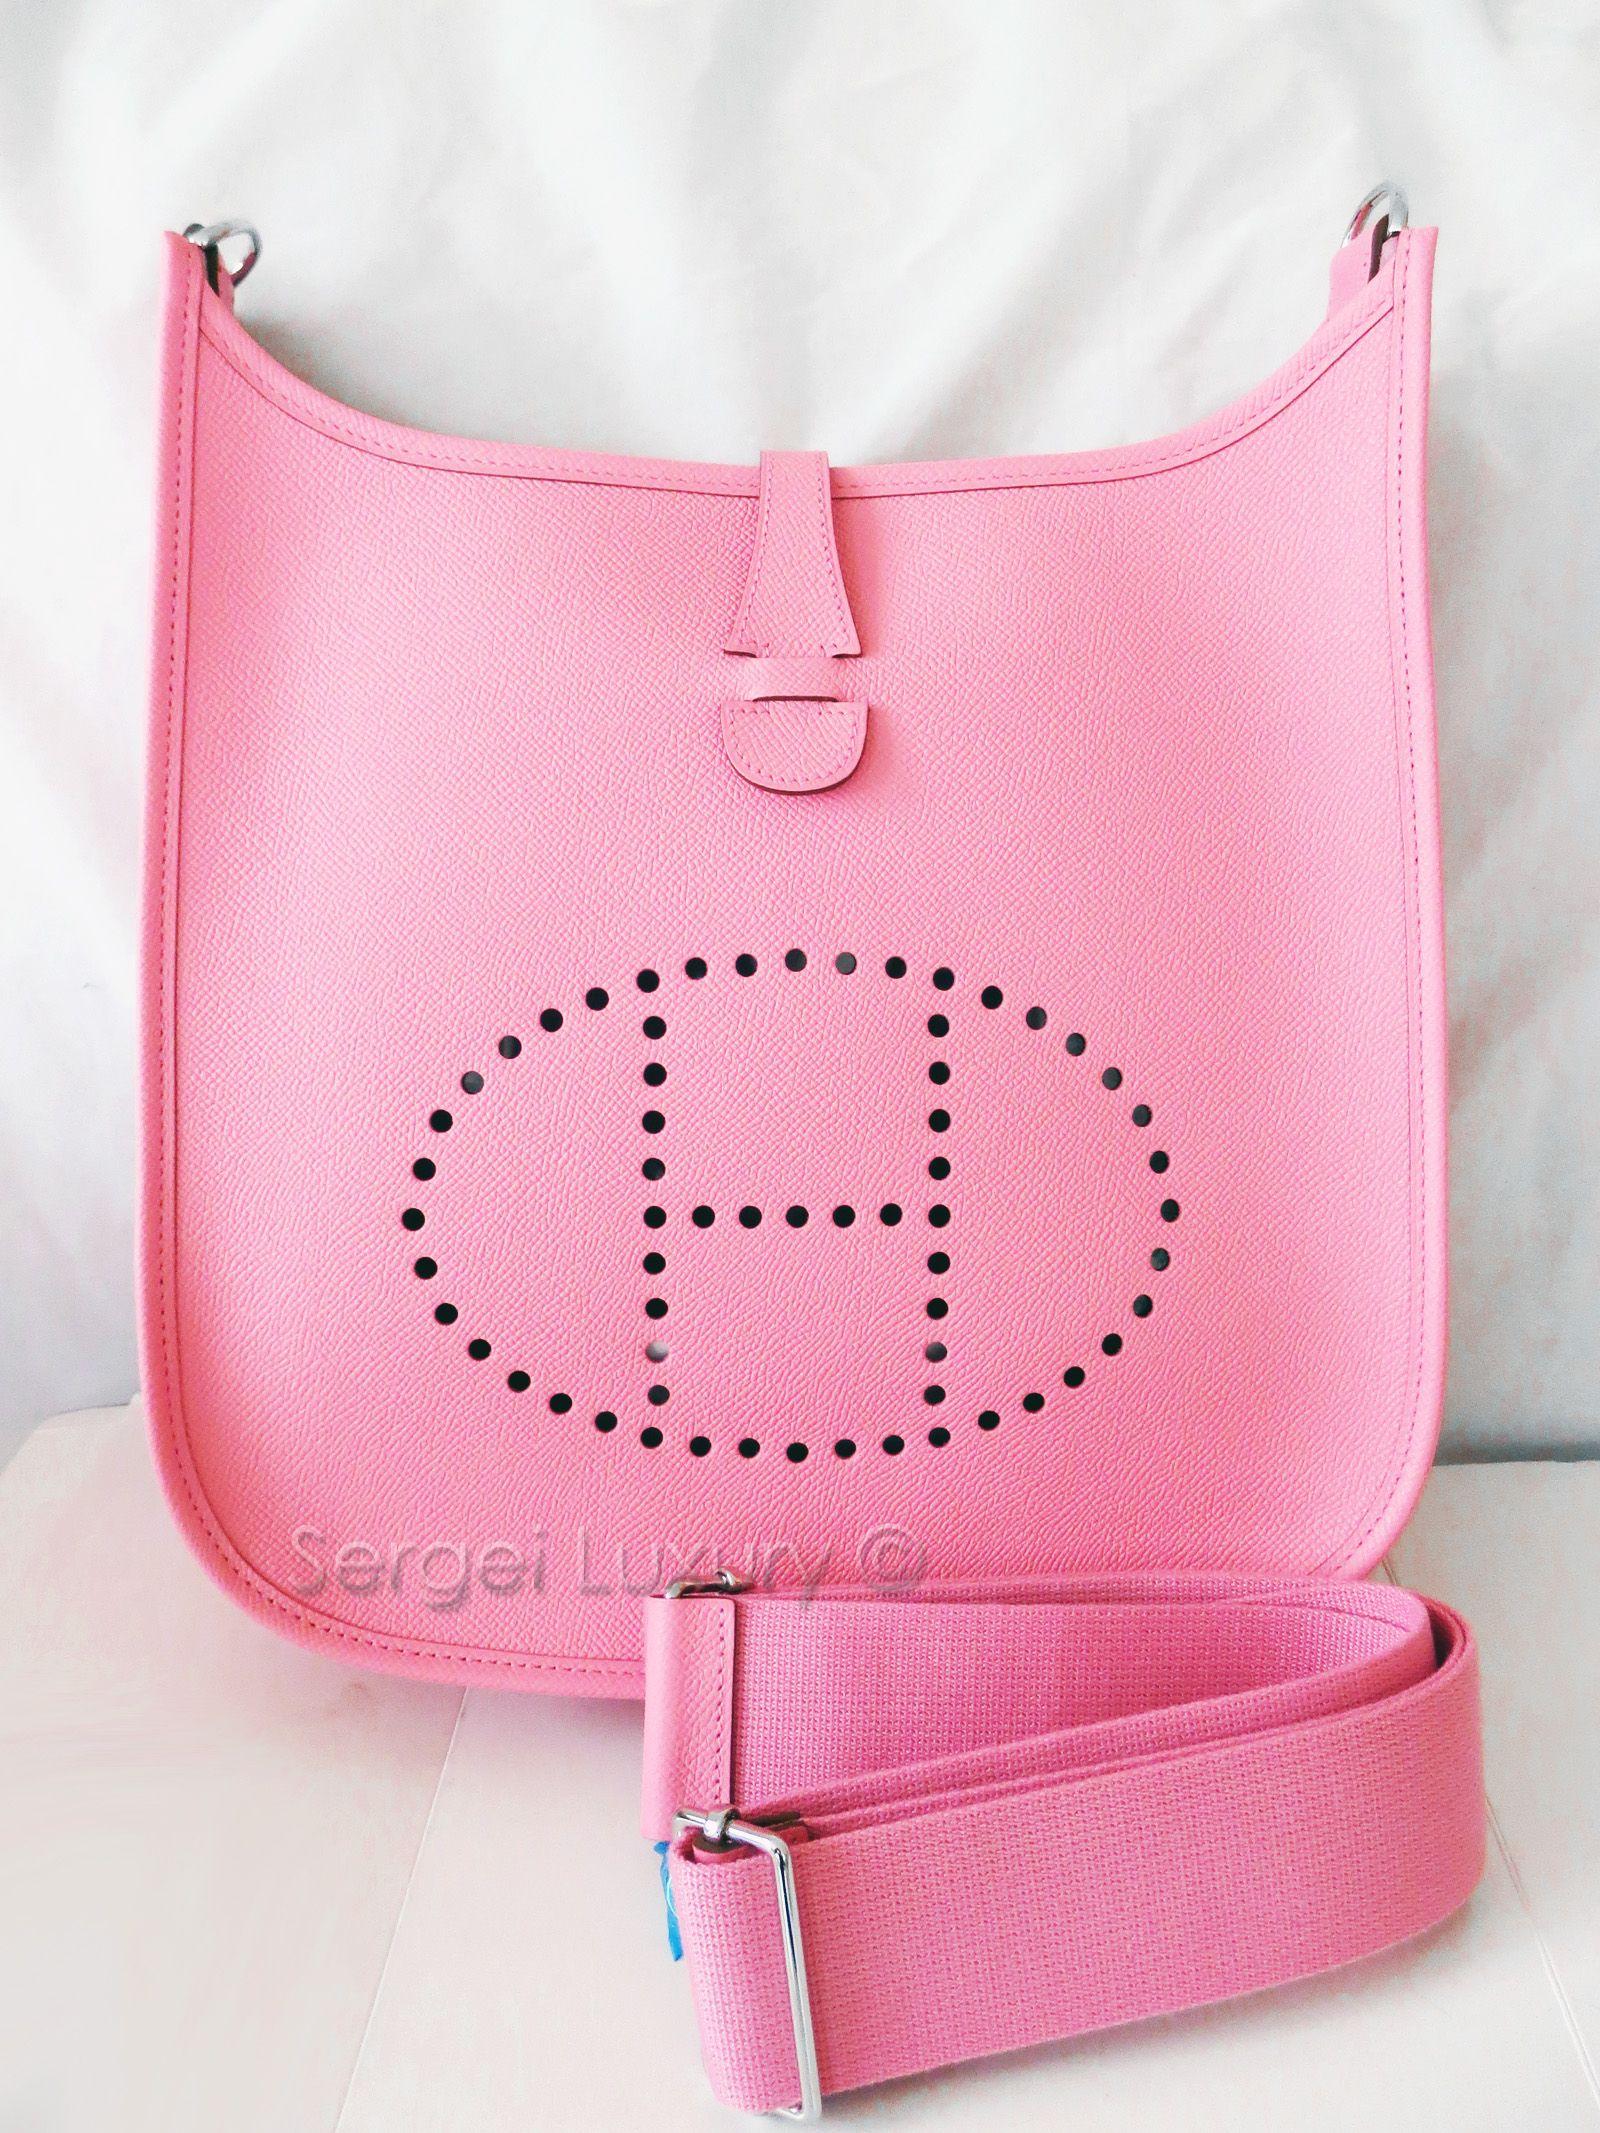 Pink Cross Logo - LOVE! New AUTHENTIC Hermes Evelyne PM Rose Confetti PINK Cross body ...